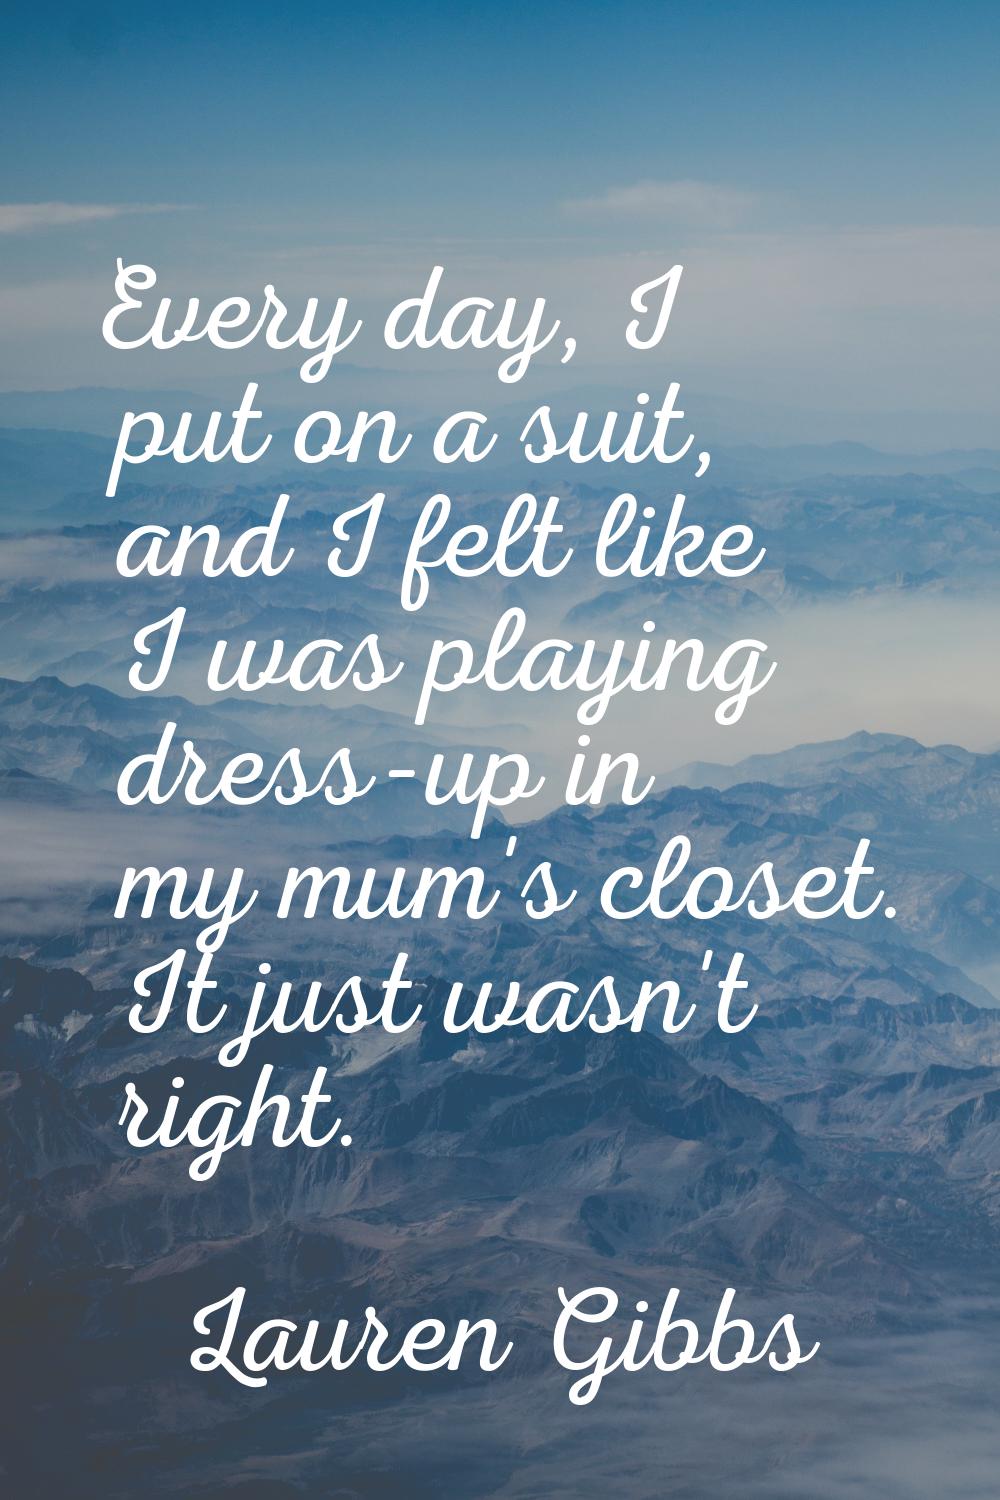 Every day, I put on a suit, and I felt like I was playing dress-up in my mum's closet. It just wasn